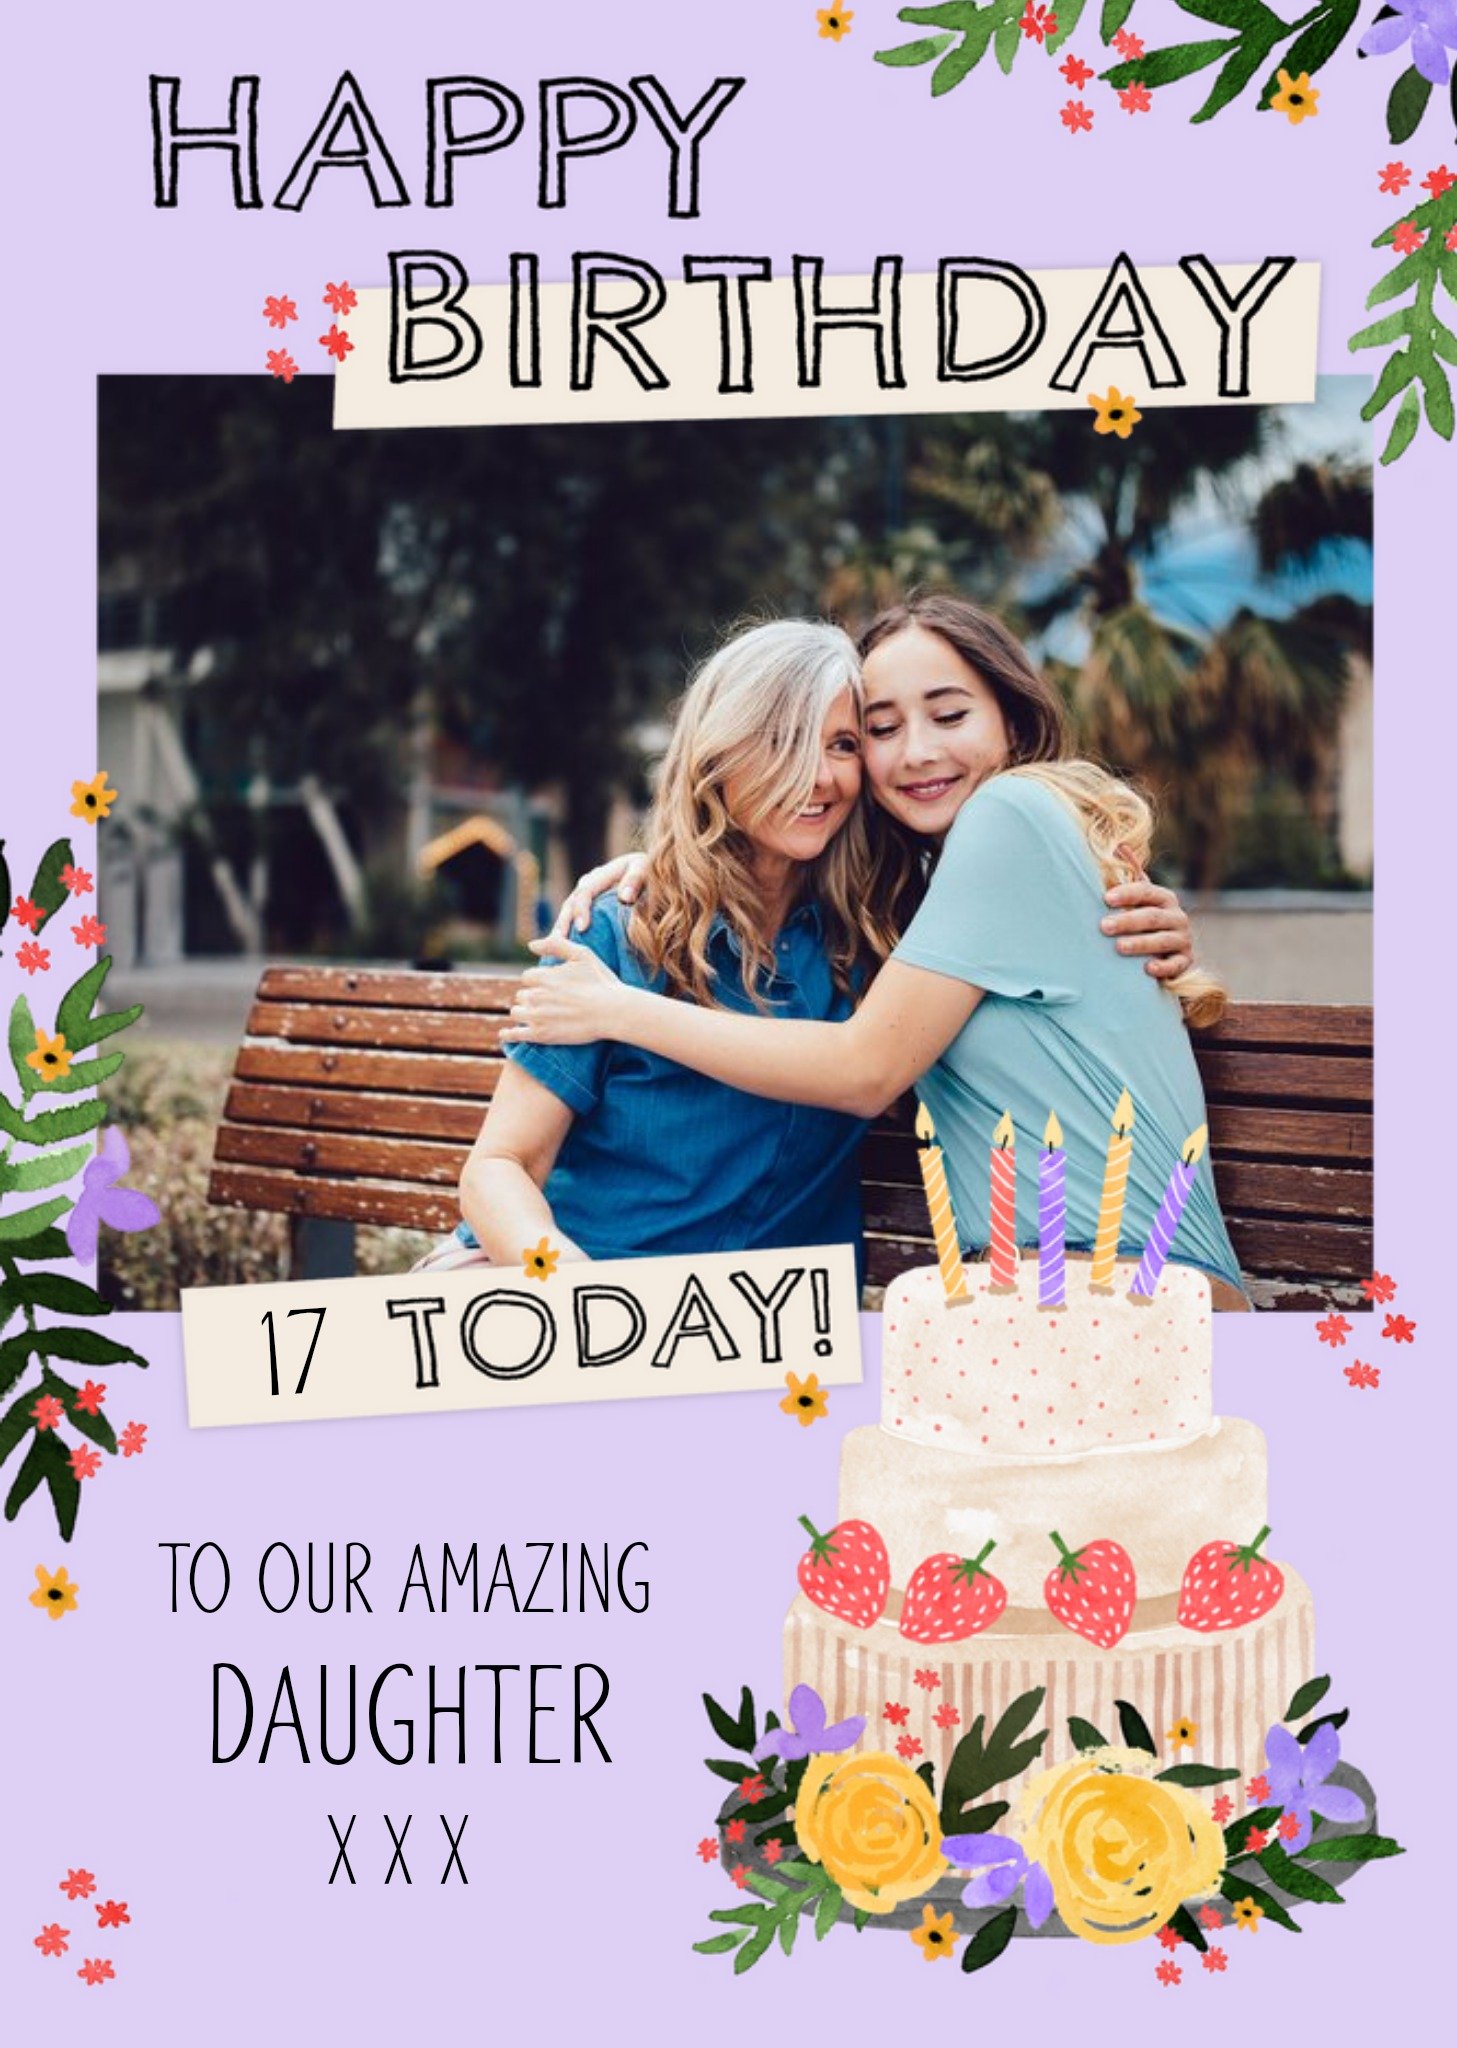 Making Meadows Decorated Cake Illustration Photo Upload Text Editable Daughter Birthday Card Ecard